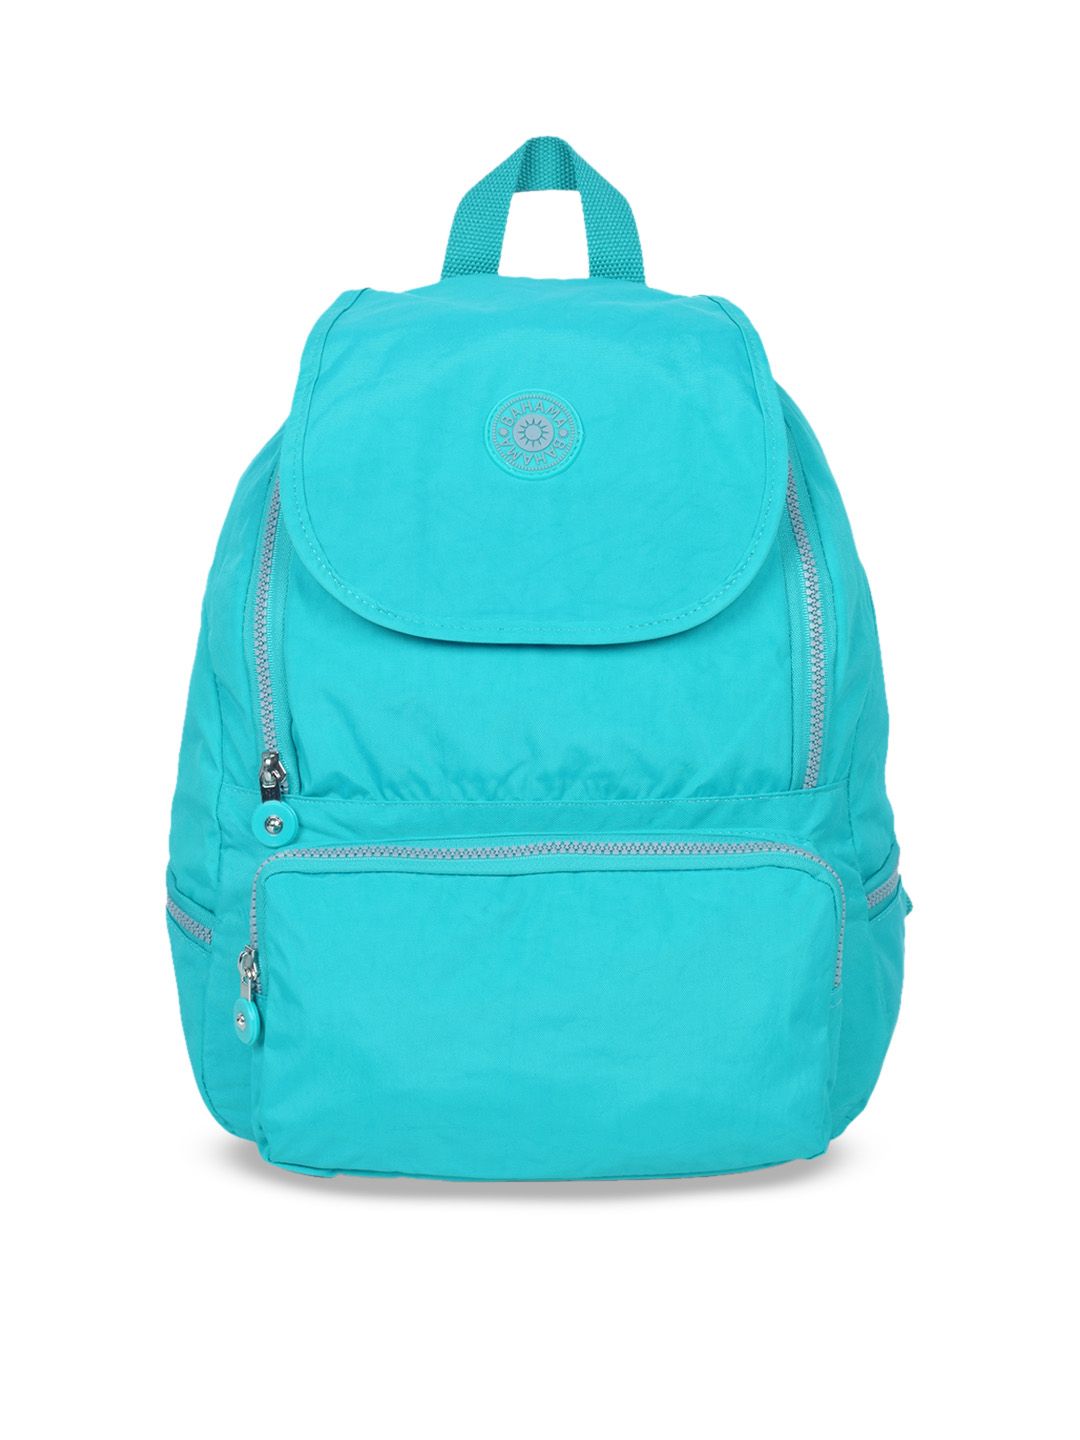 BAHAMA Crinkle Unisex Blue Solid Backpack Price in India